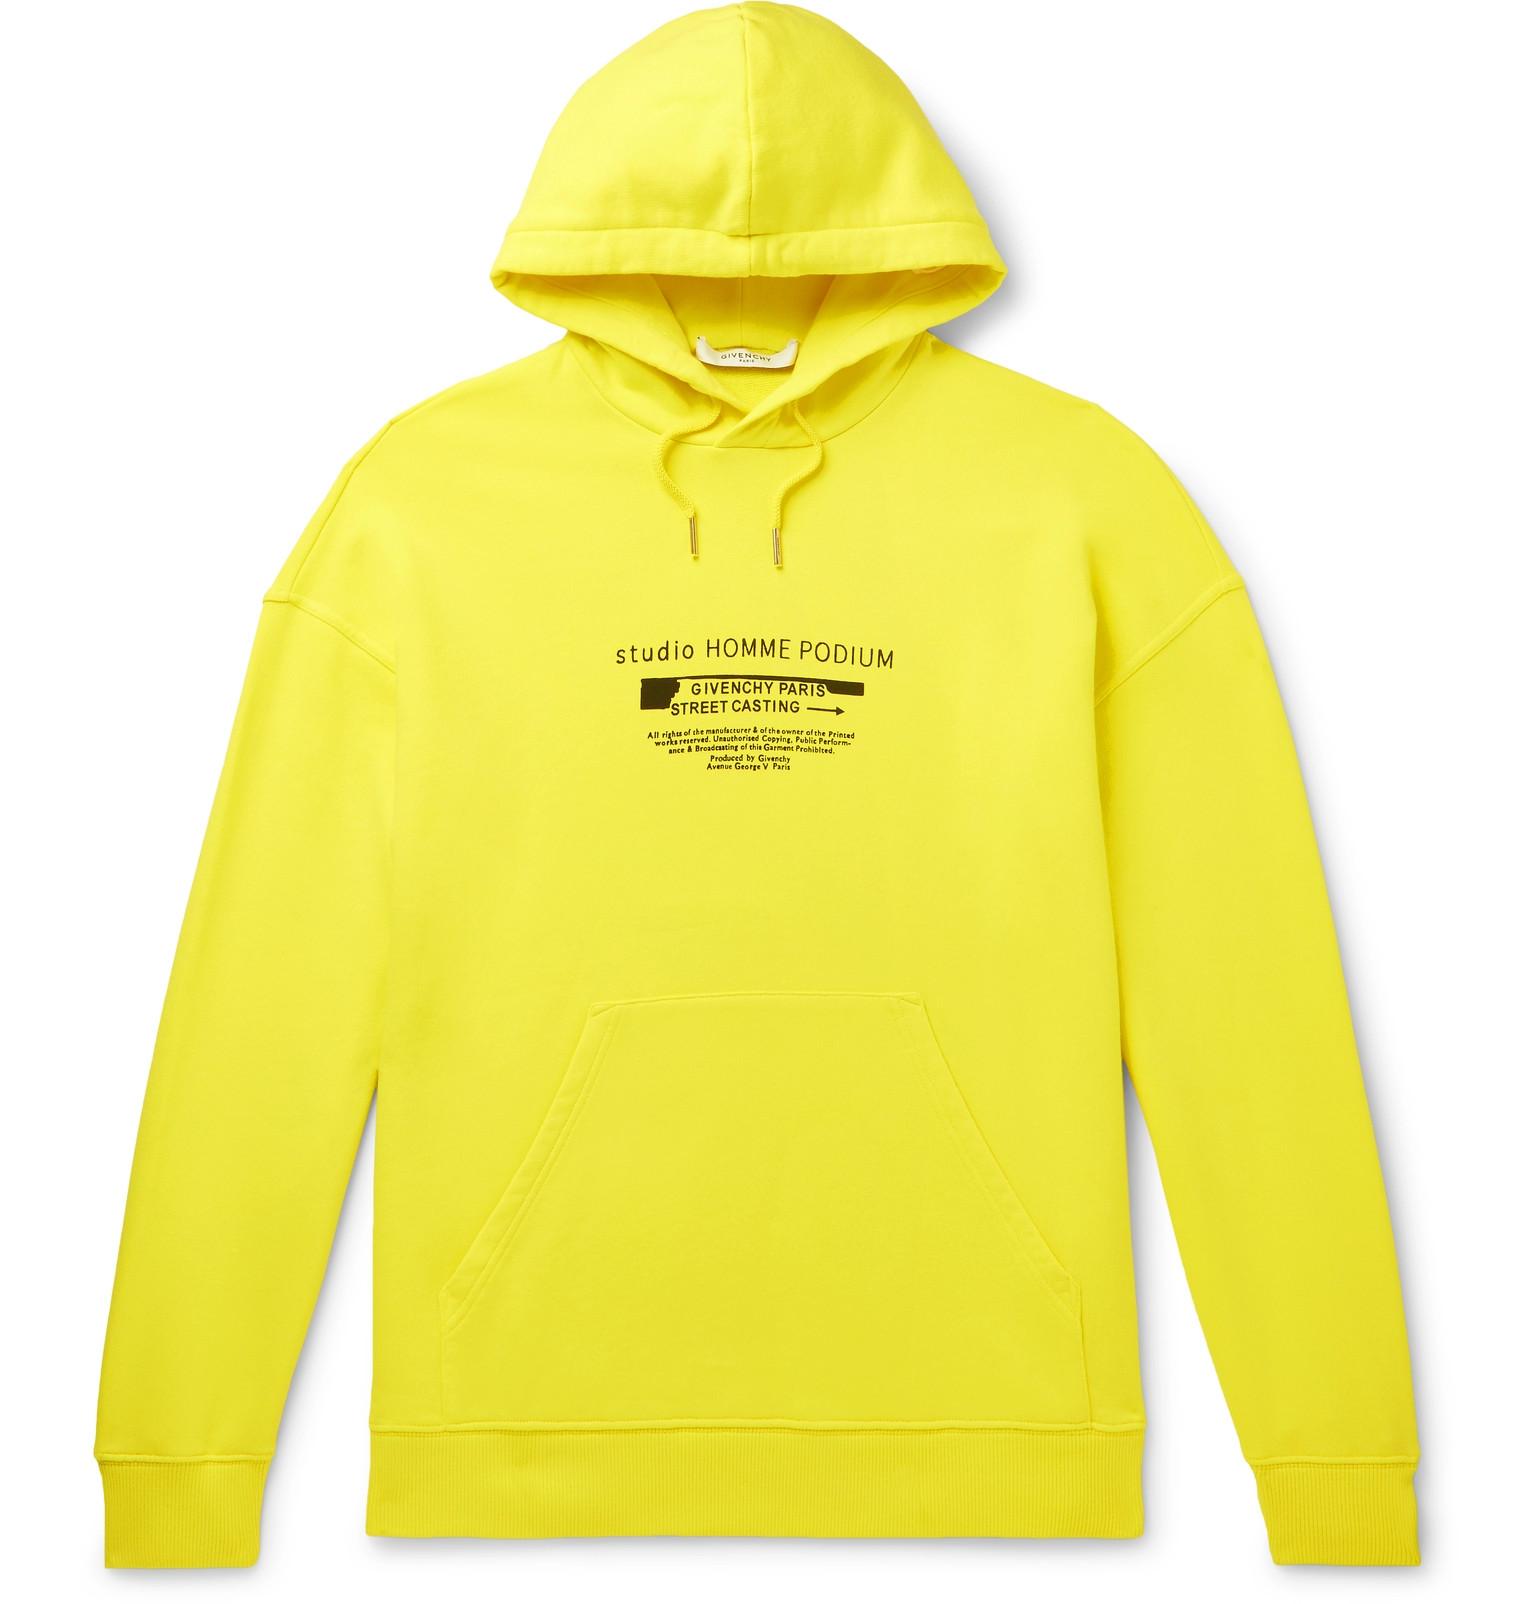 Givenchy Hooded Sweatshirt With Casting Print in Bright Yellow 